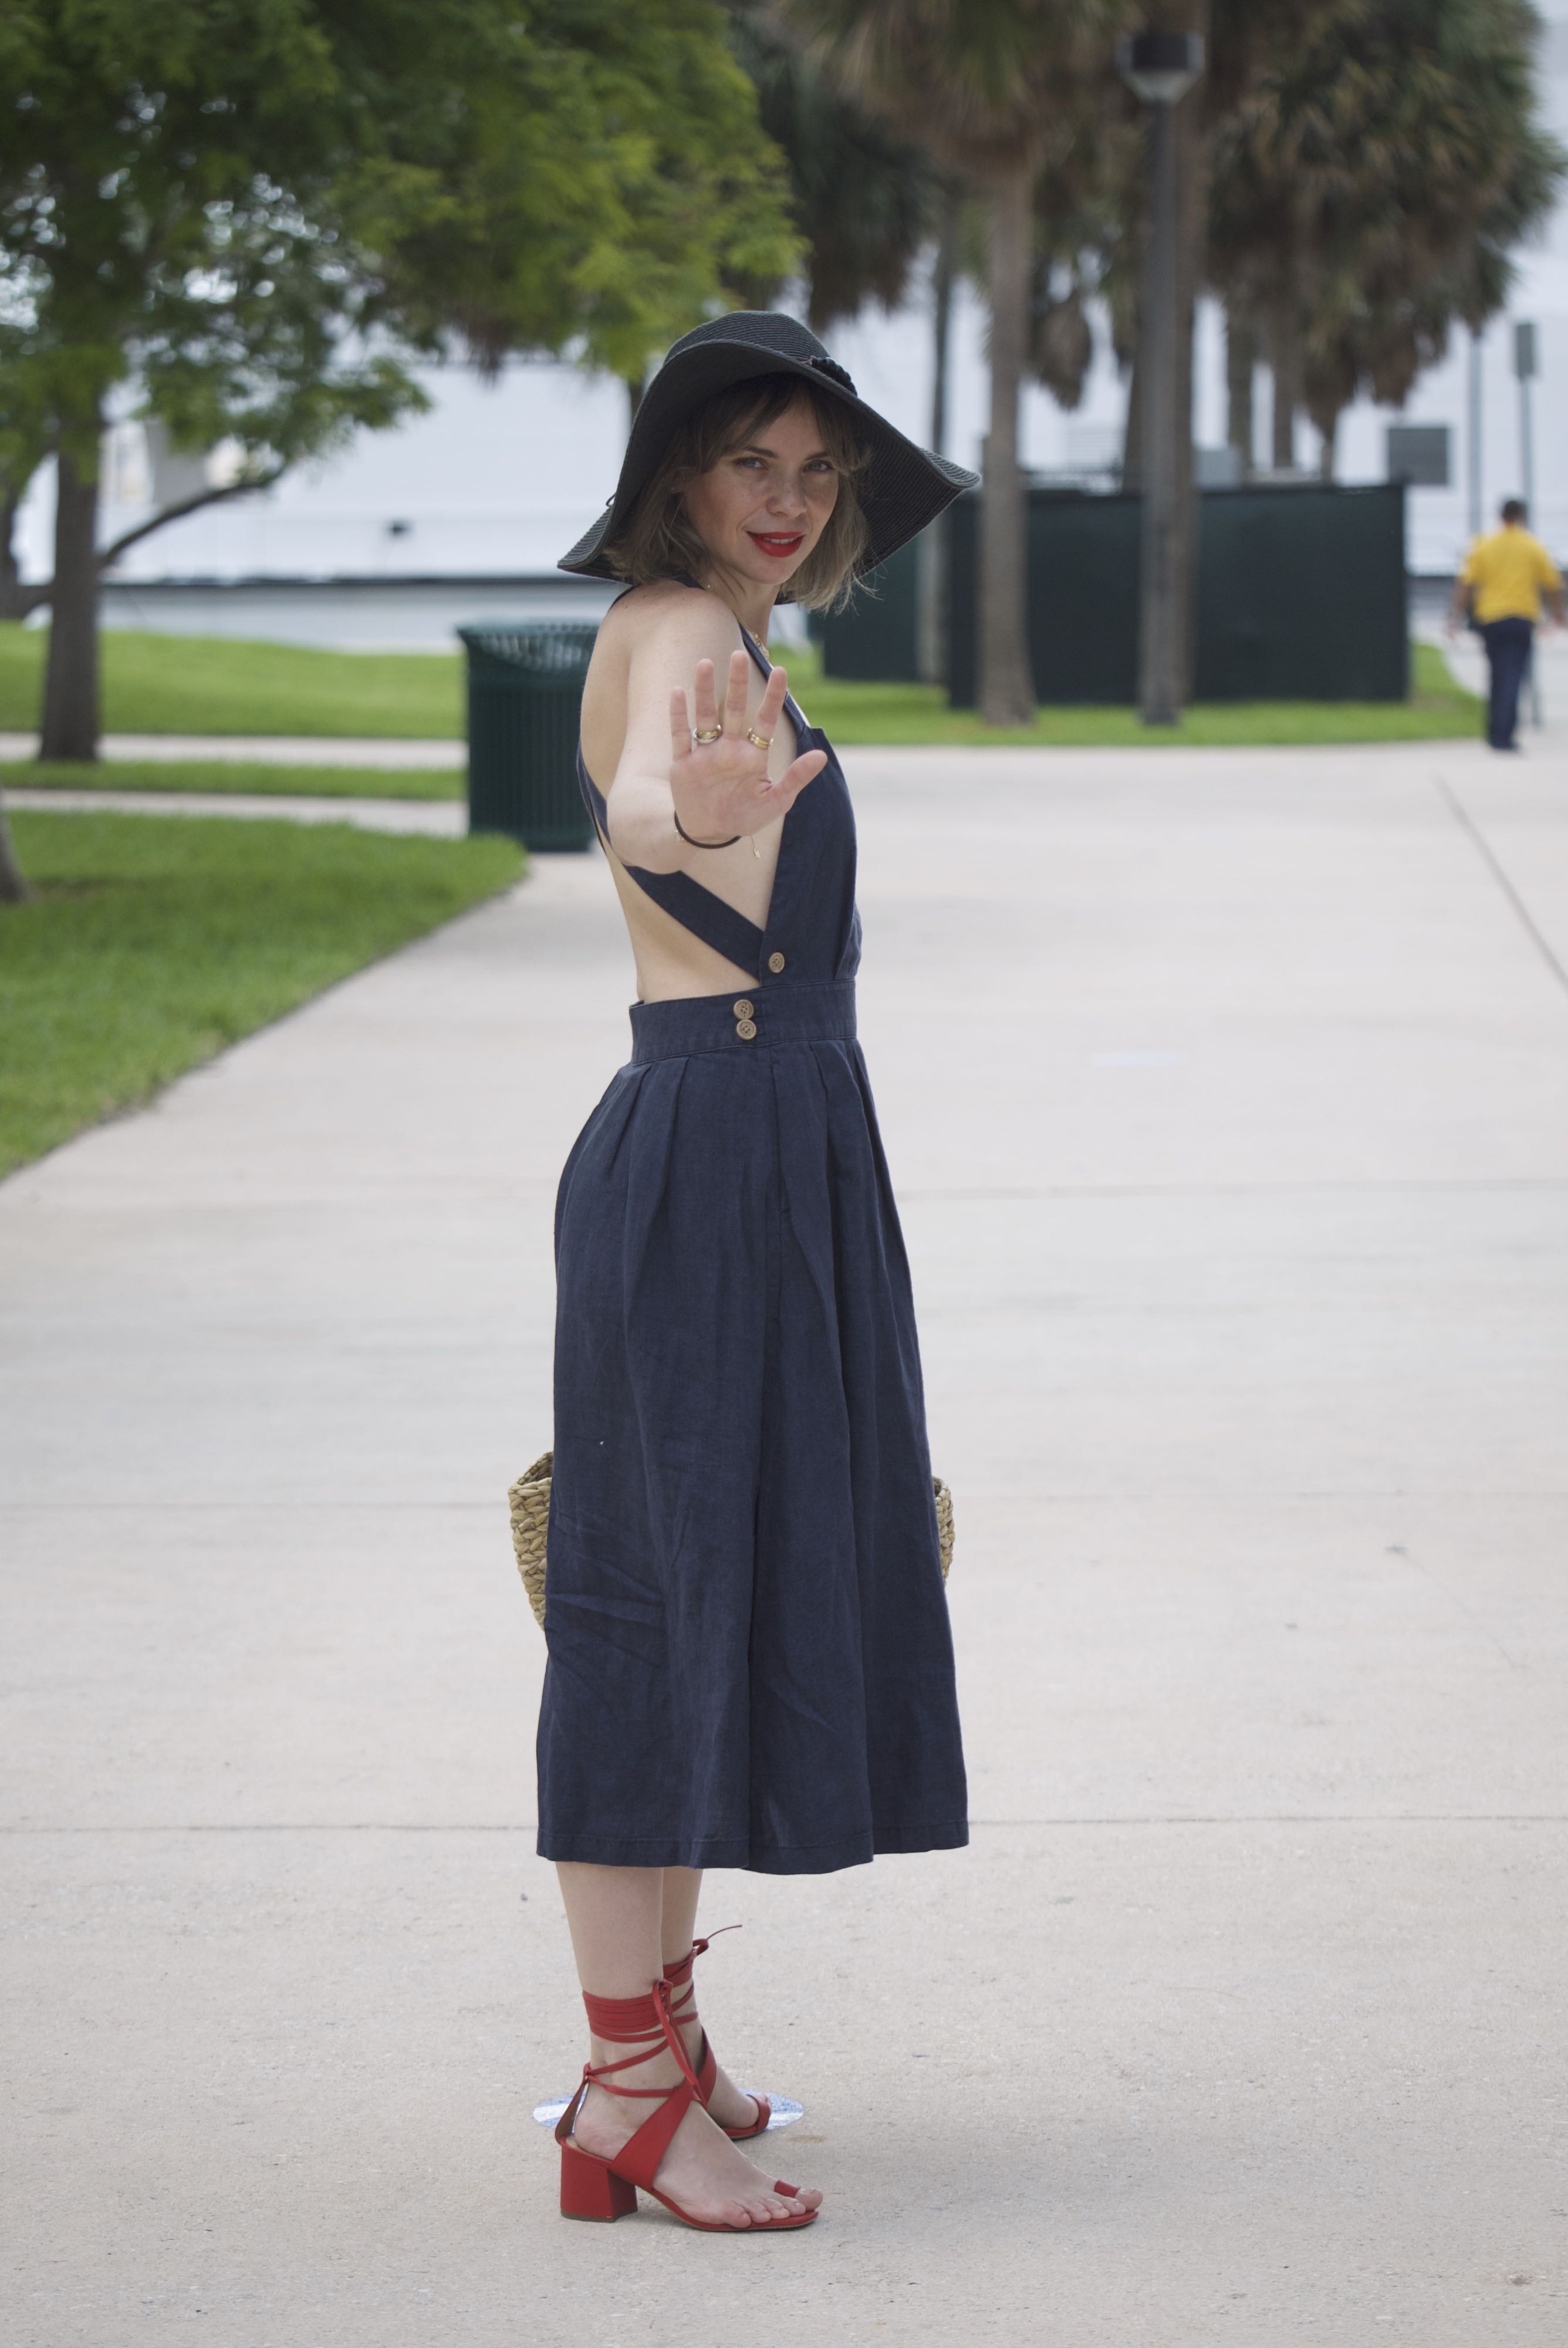 Alba Marina fashion blogger from Mylovelypeople blog is wearing a linen dress from Mango and red block heels from Freepeople.